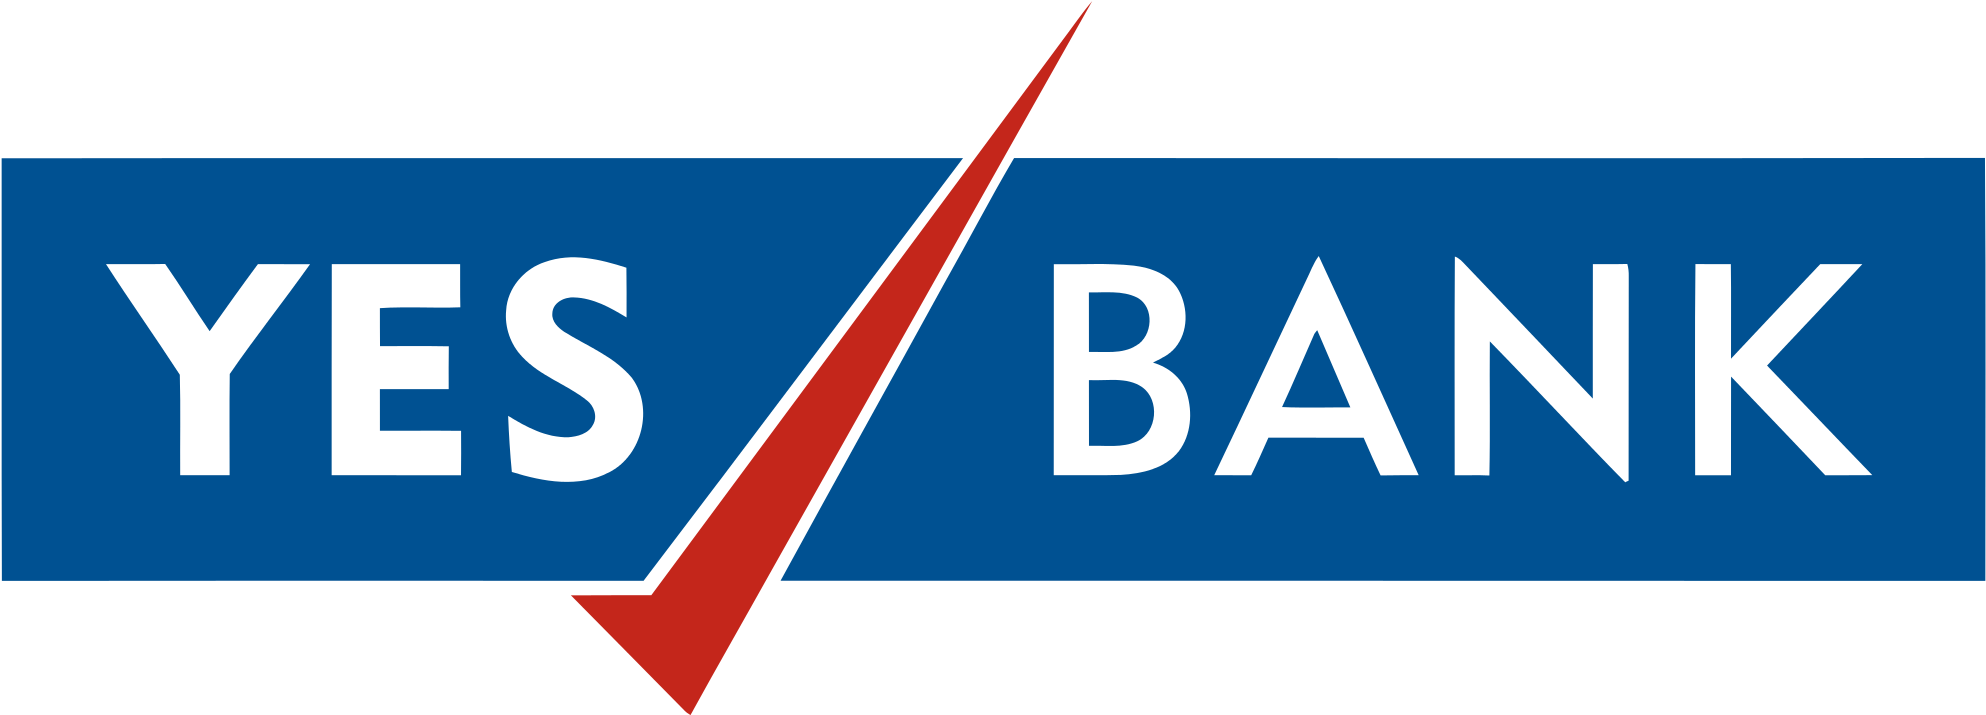 File Yes Bank Svg Logo Svg Wikimedia Commons Rh Commons - Yes Bank Logo Png (2000x747)